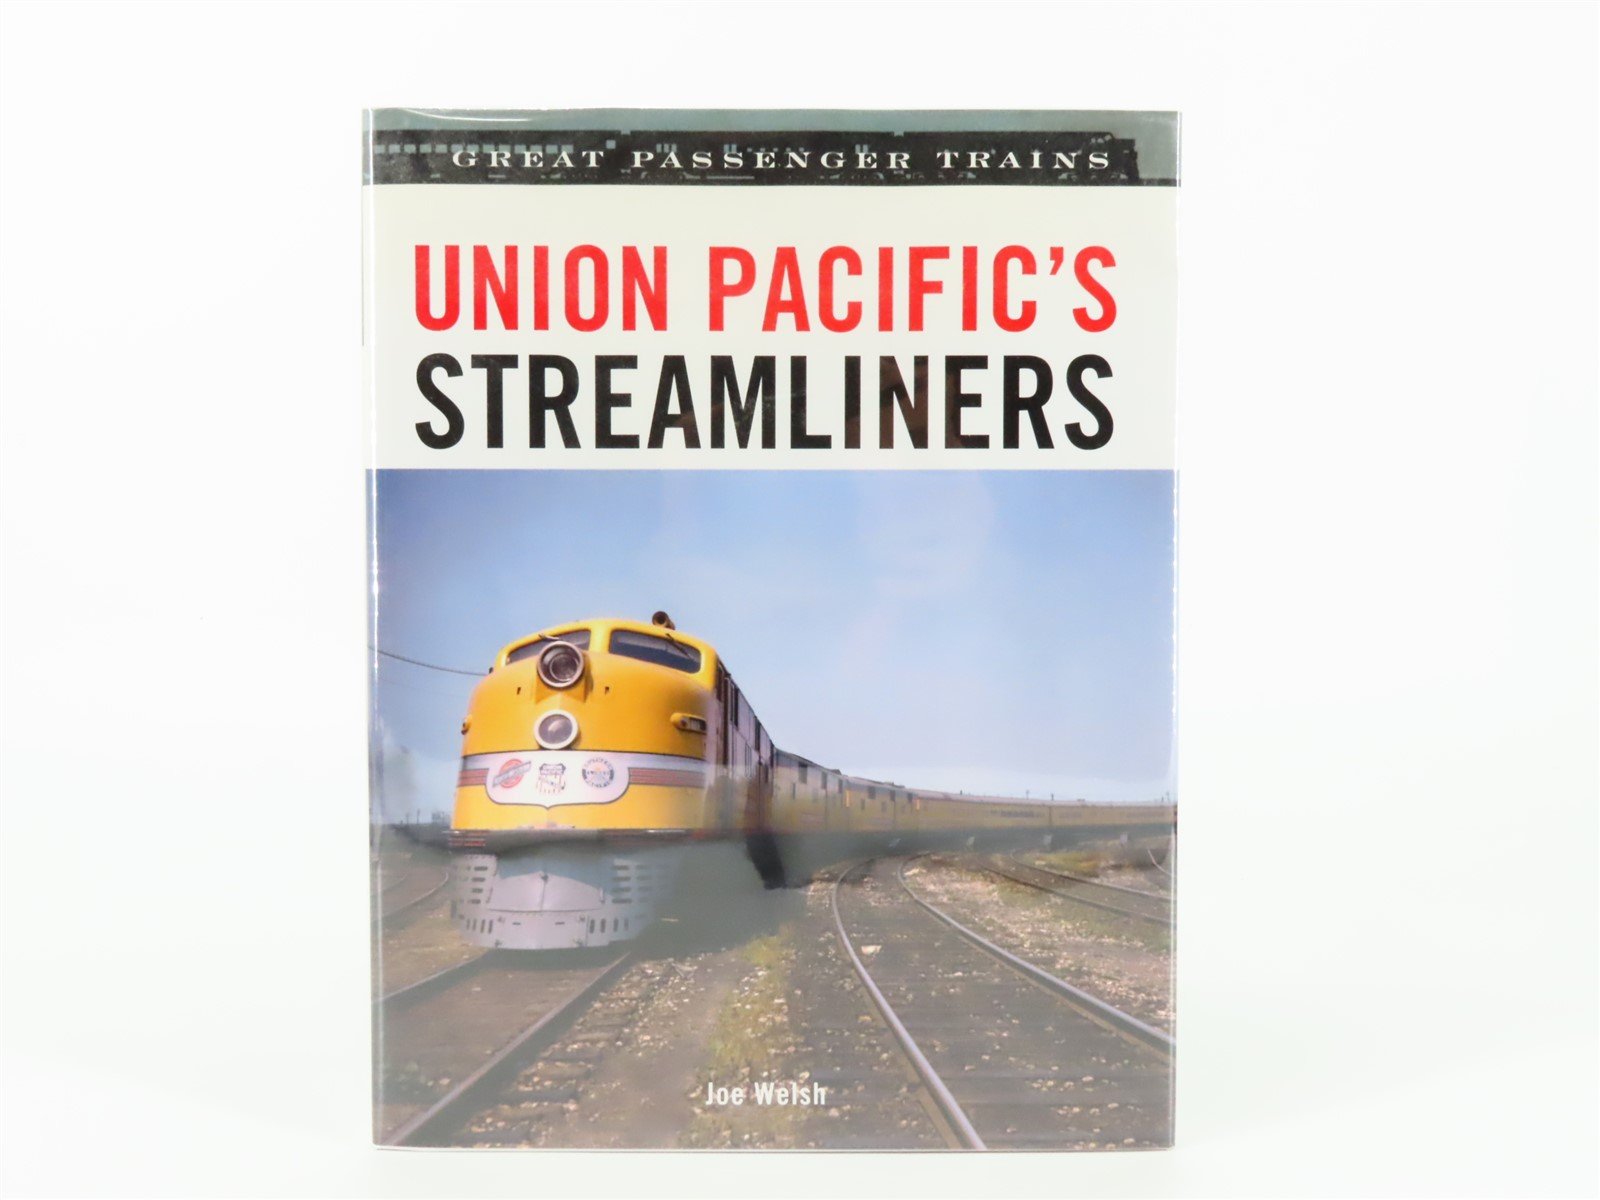 Great Passenger Trains: Union Pacific's Streamliners by Joe Welsh ©2008 HC Book